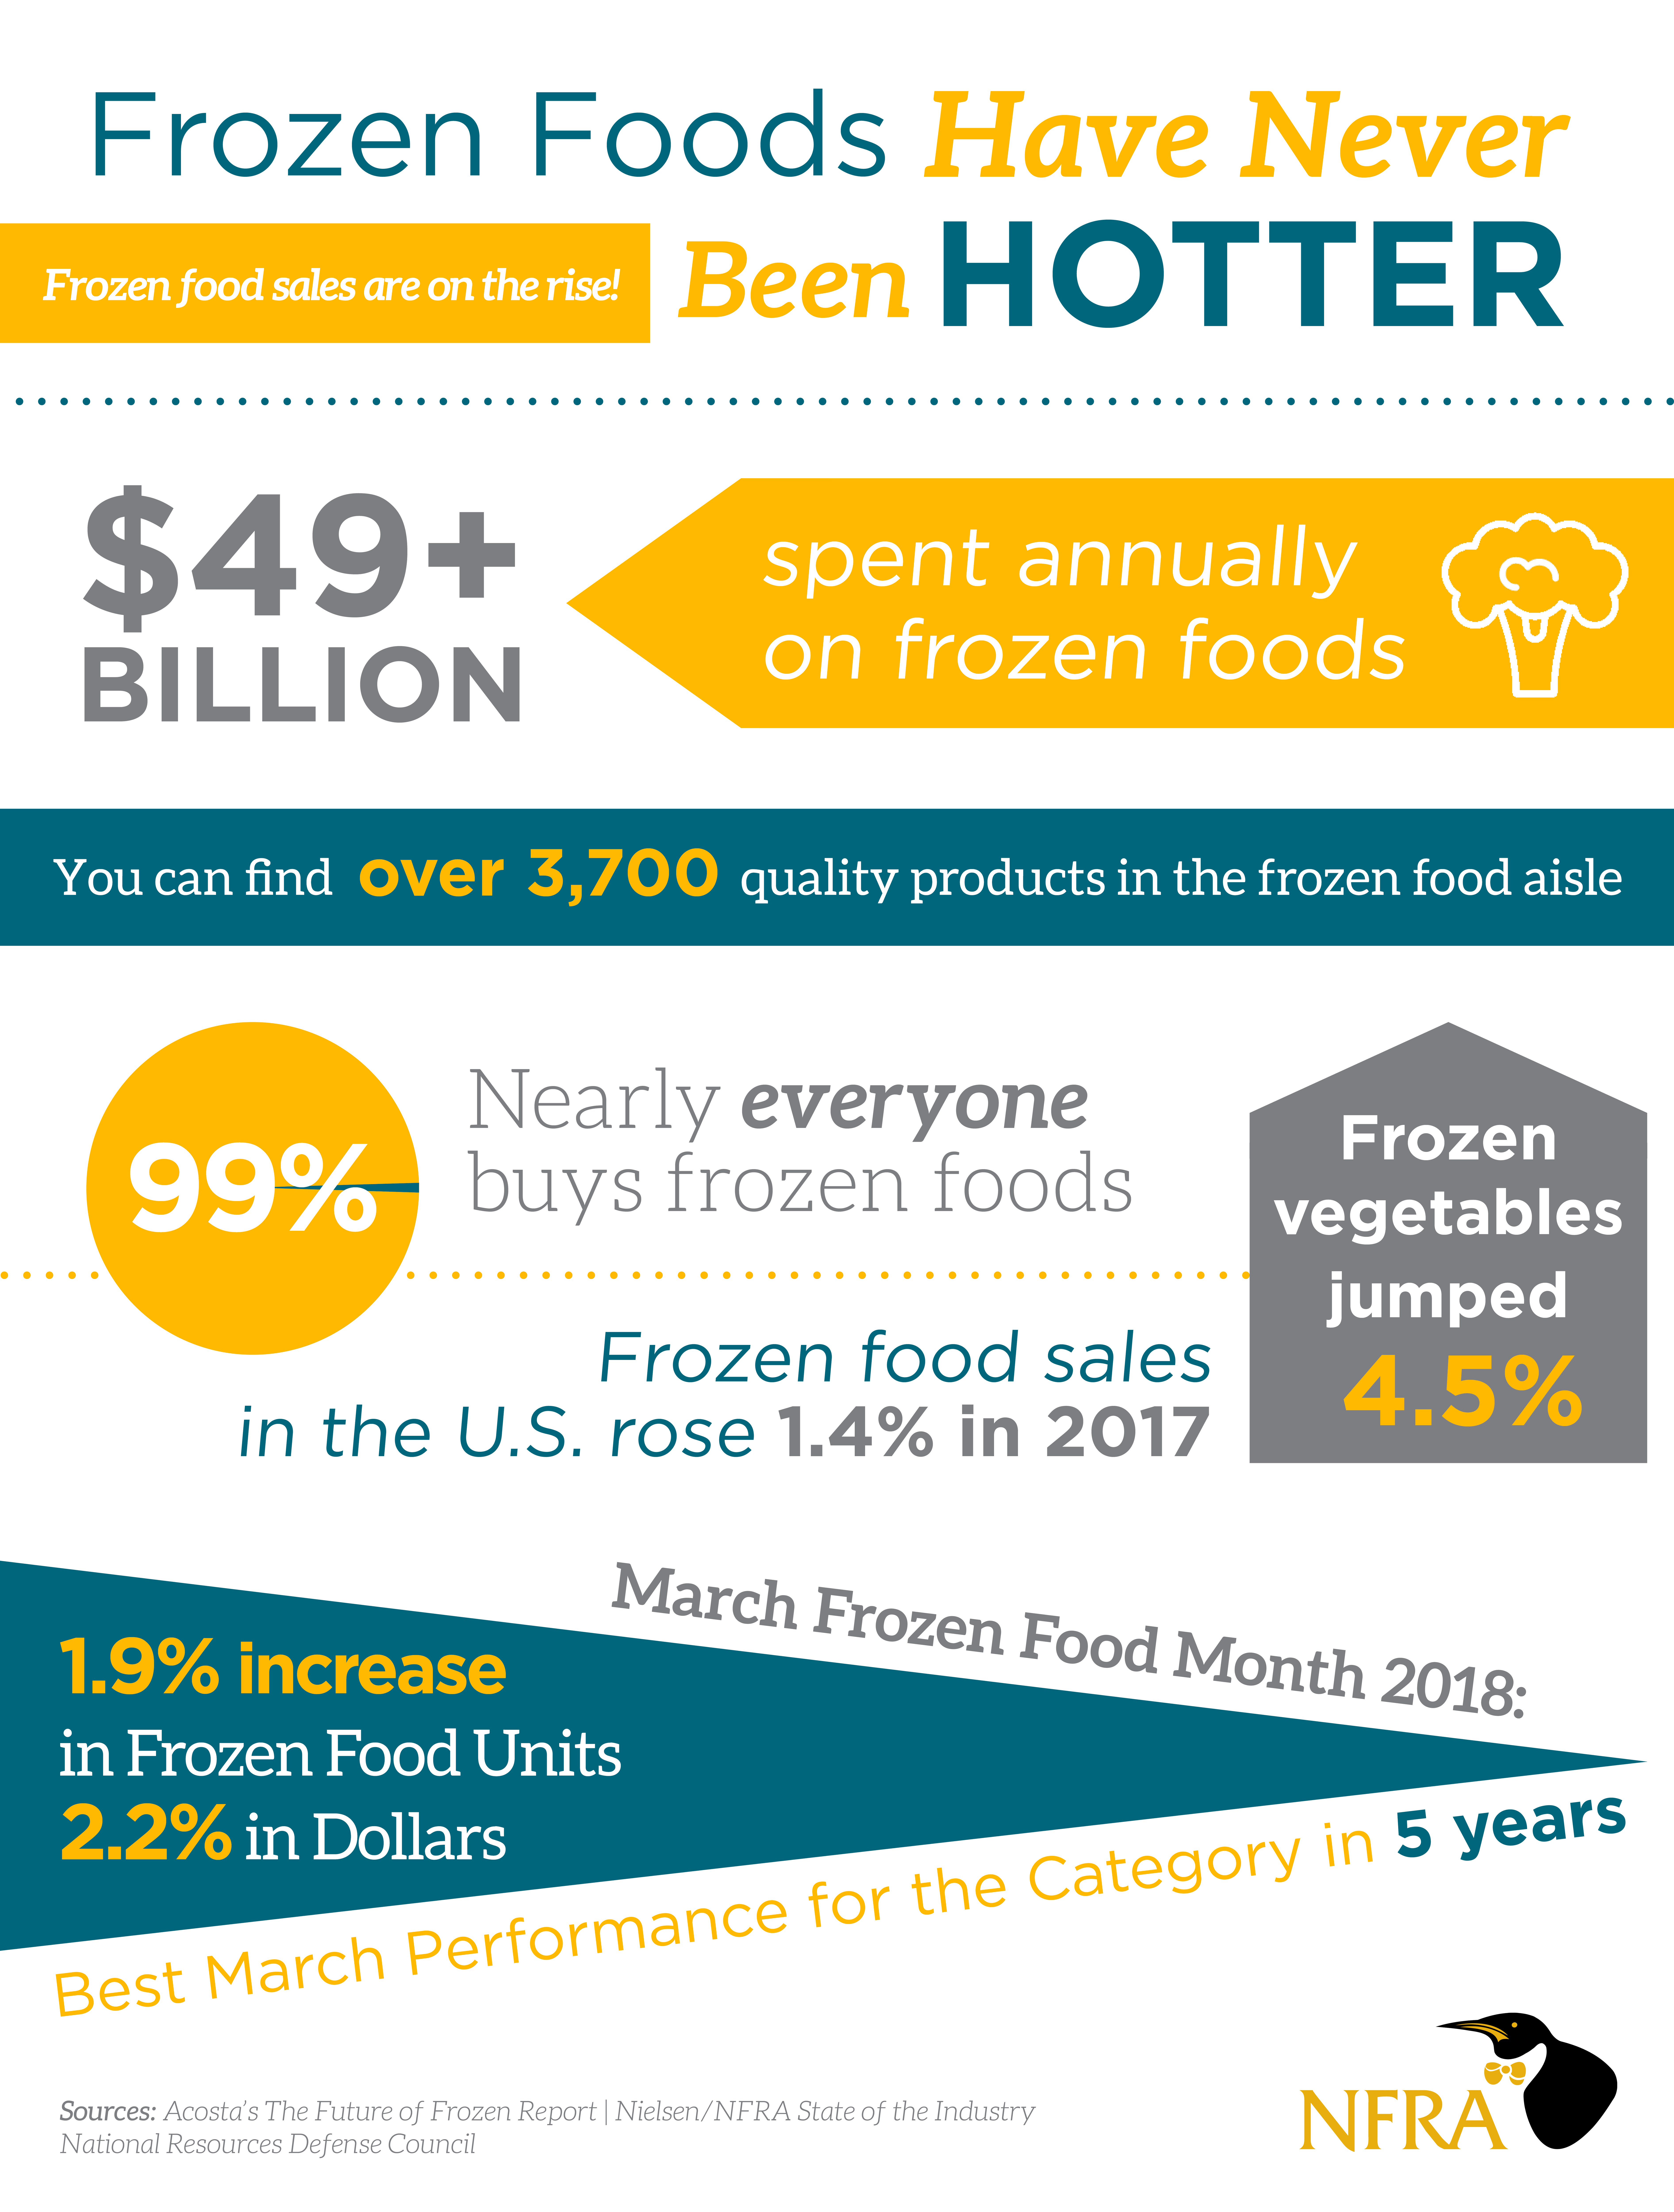 March Frozen Food Month Toolkit National Frozen & Refrigerated Foods